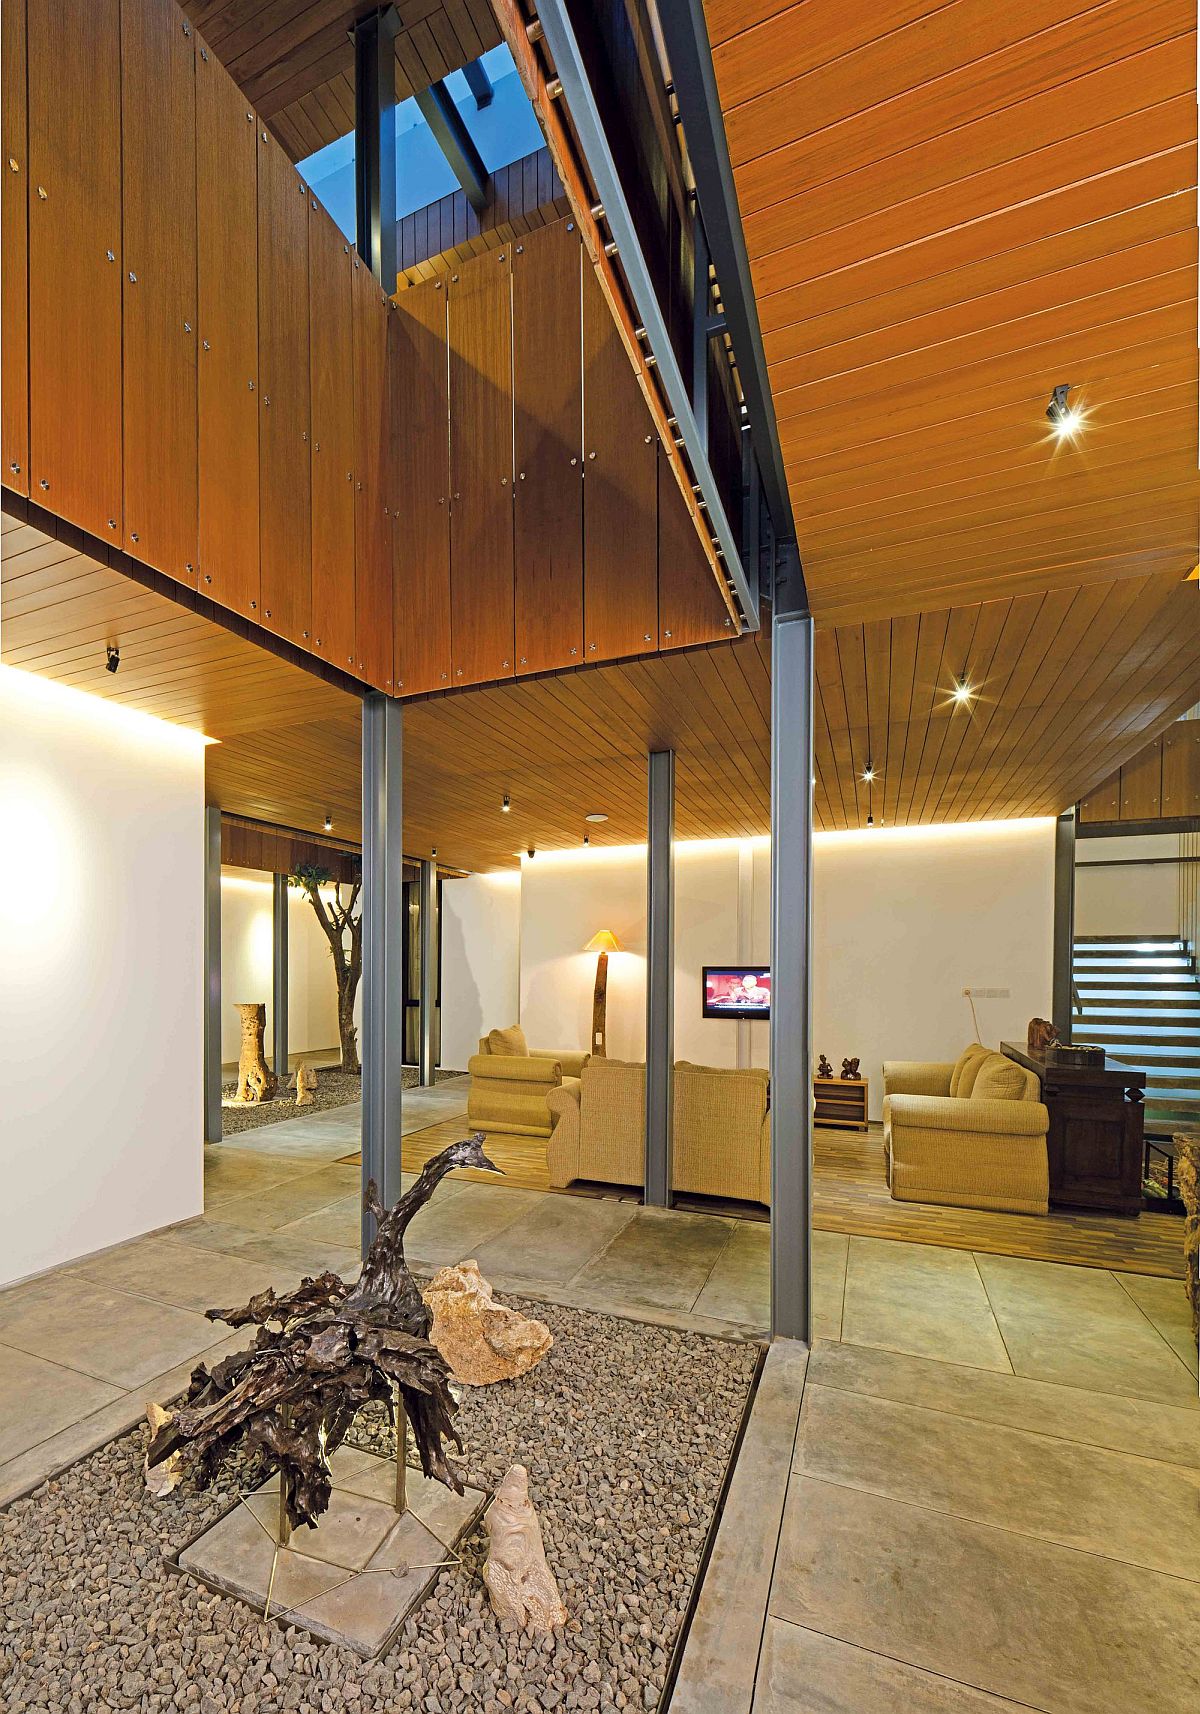 Central void inside the house brings light into the courtyard